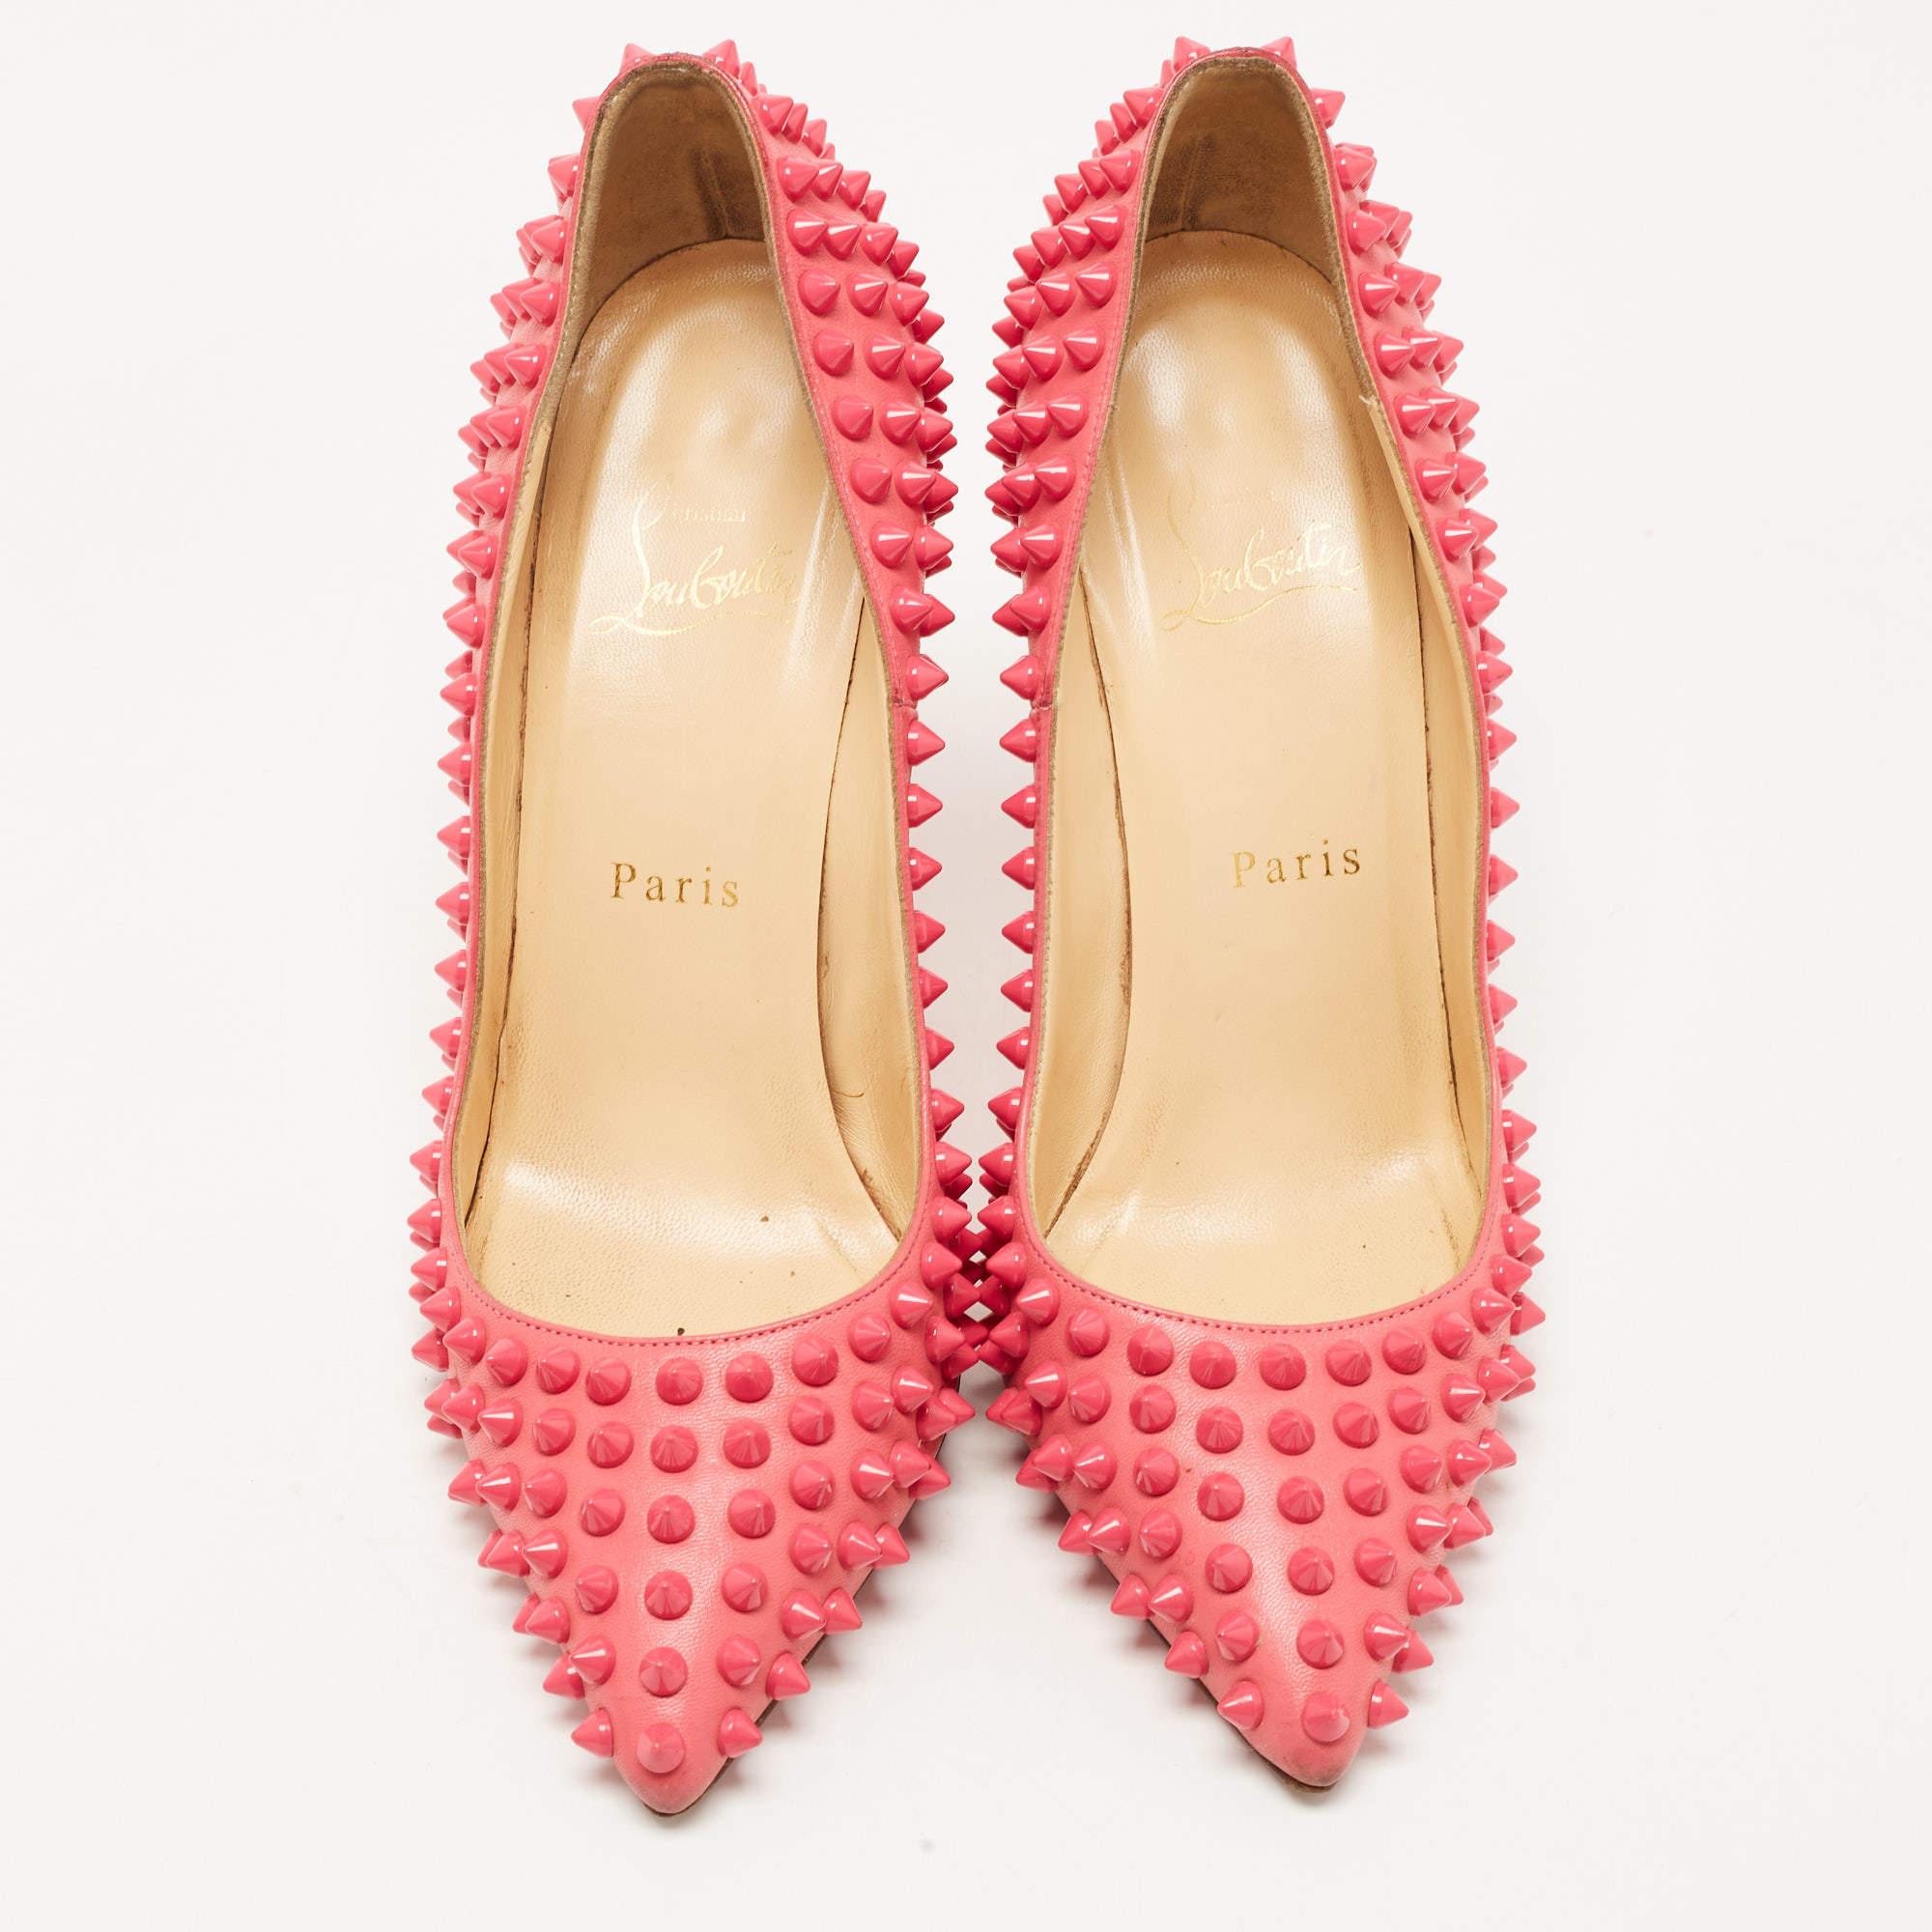 Add a statement finish with these Louboutins. Presented in pink leather, these Pigalle Spike pumps carry eye-catching details, pointed toes, and 10 cm heels. Complete with the signature red soles, this pair truly embodies the fine art of